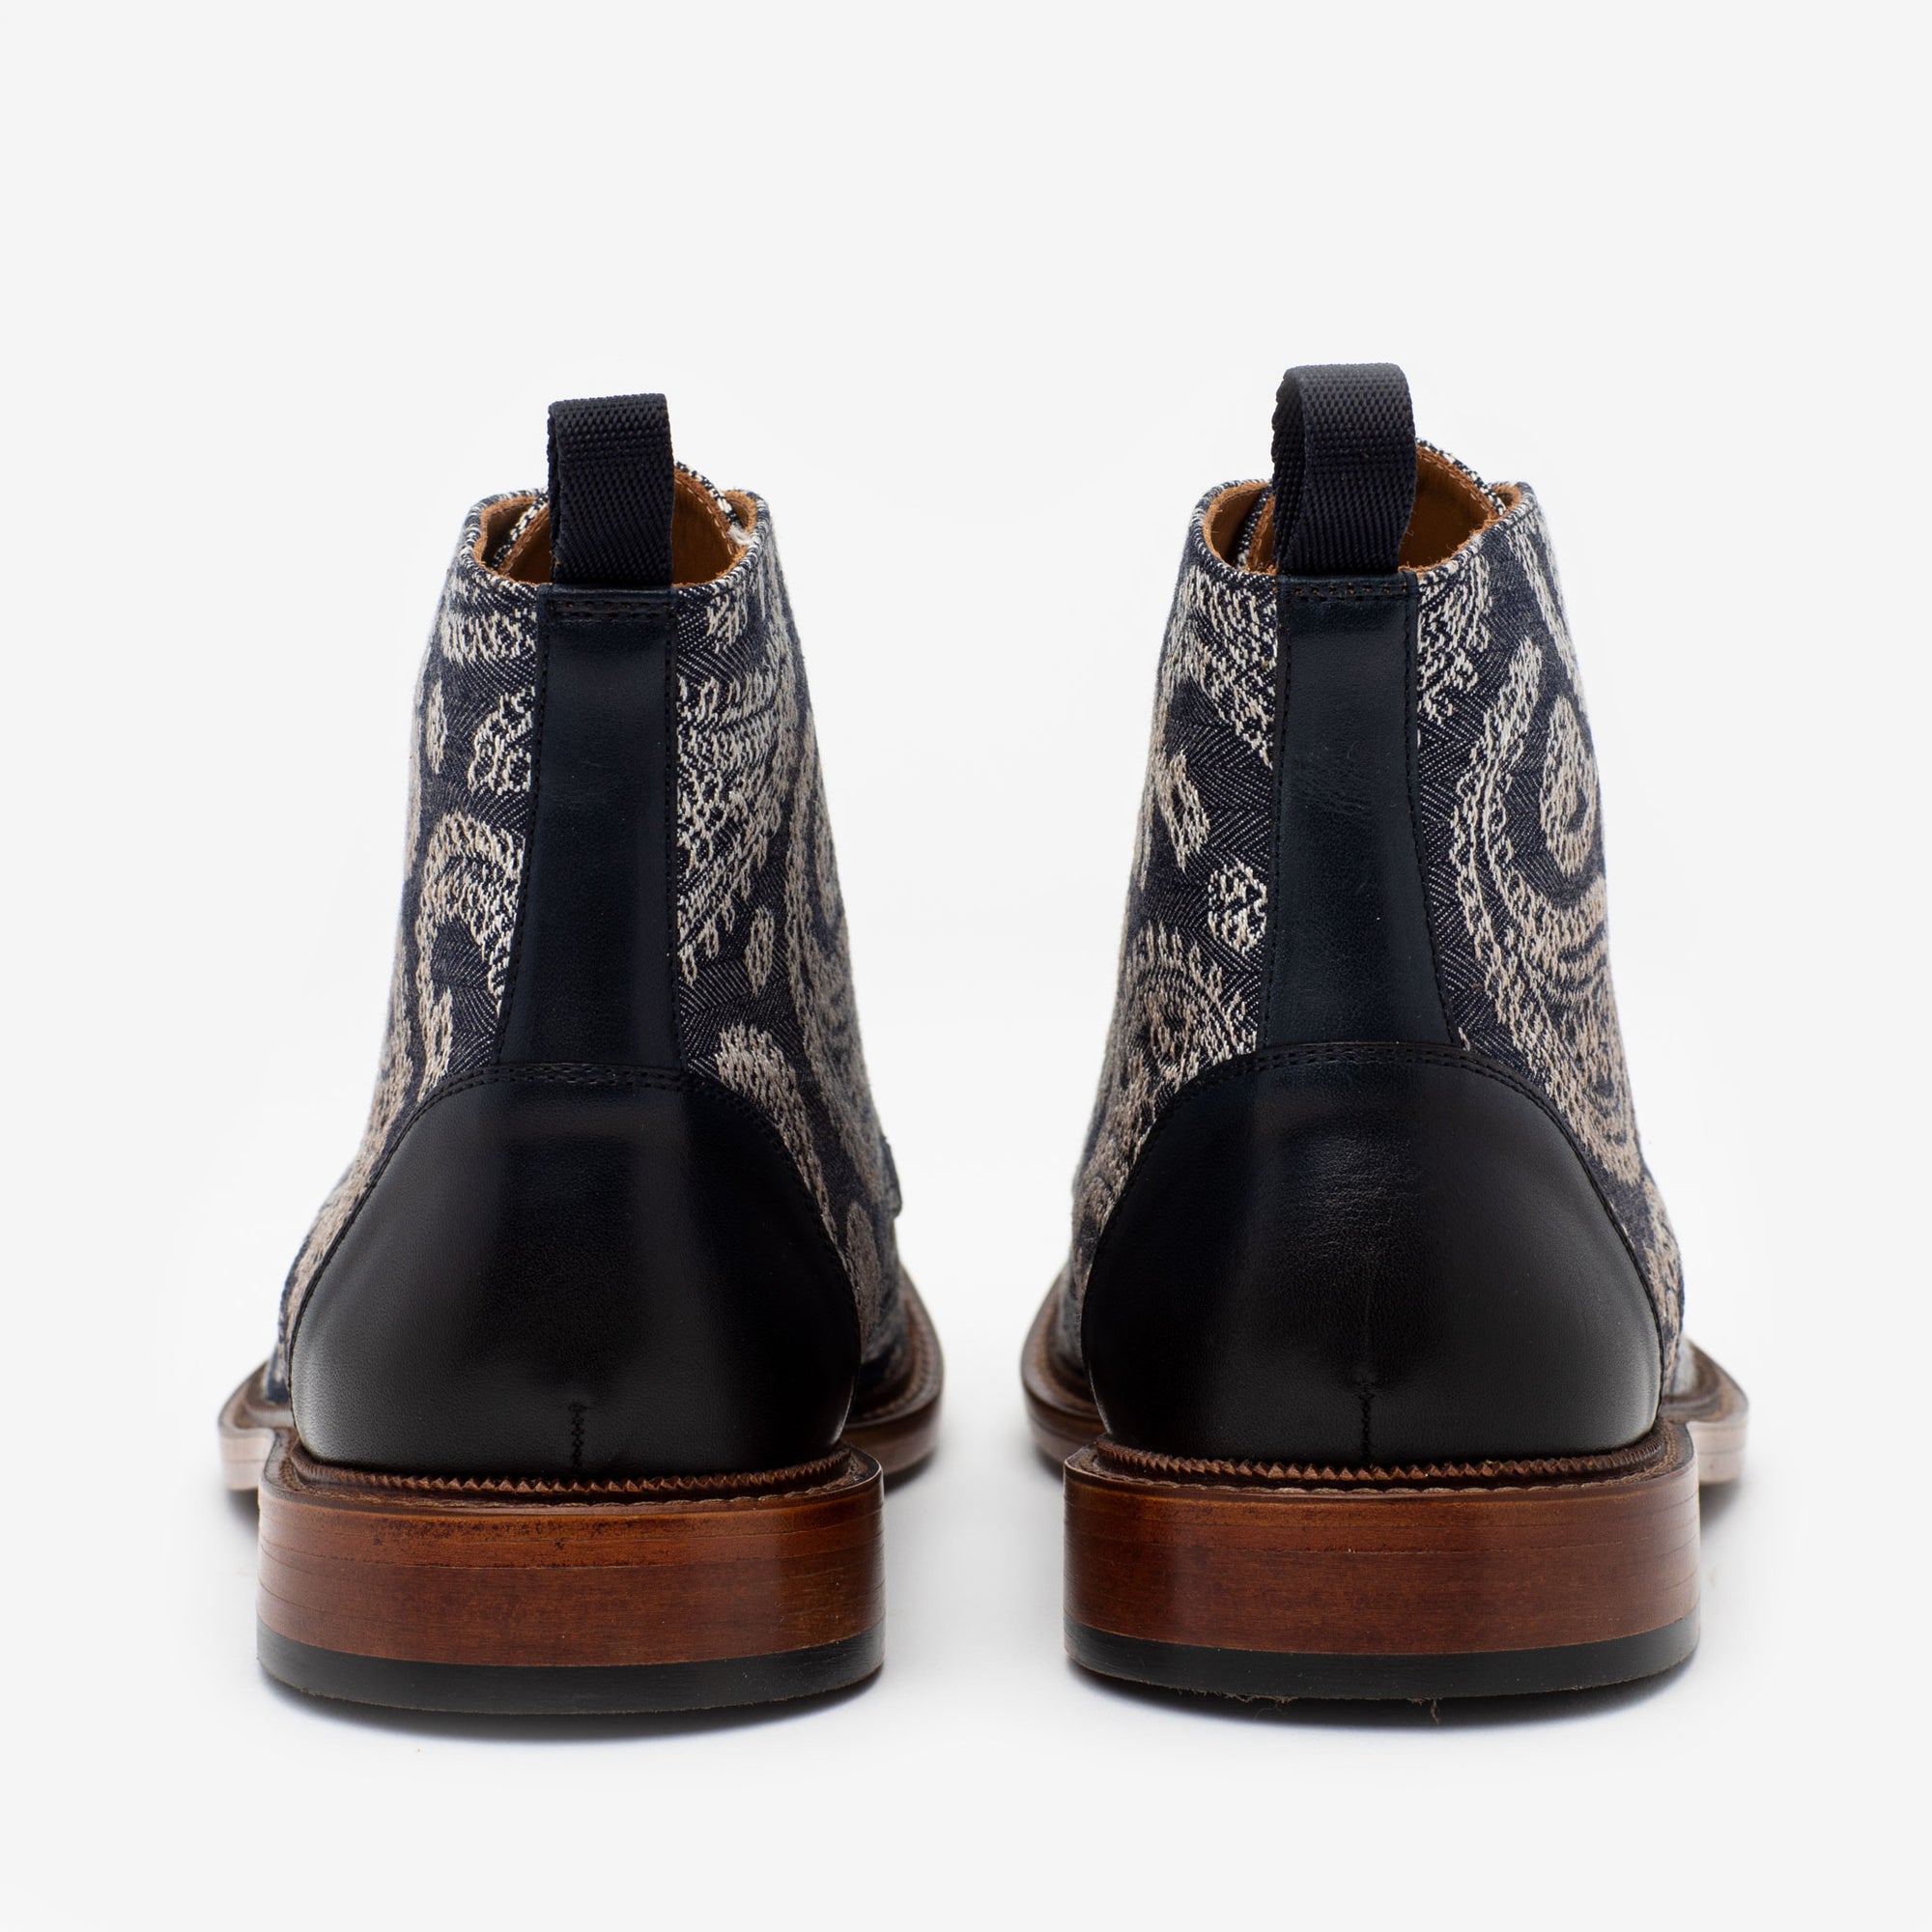 The Jack Boot in Blue Paisley